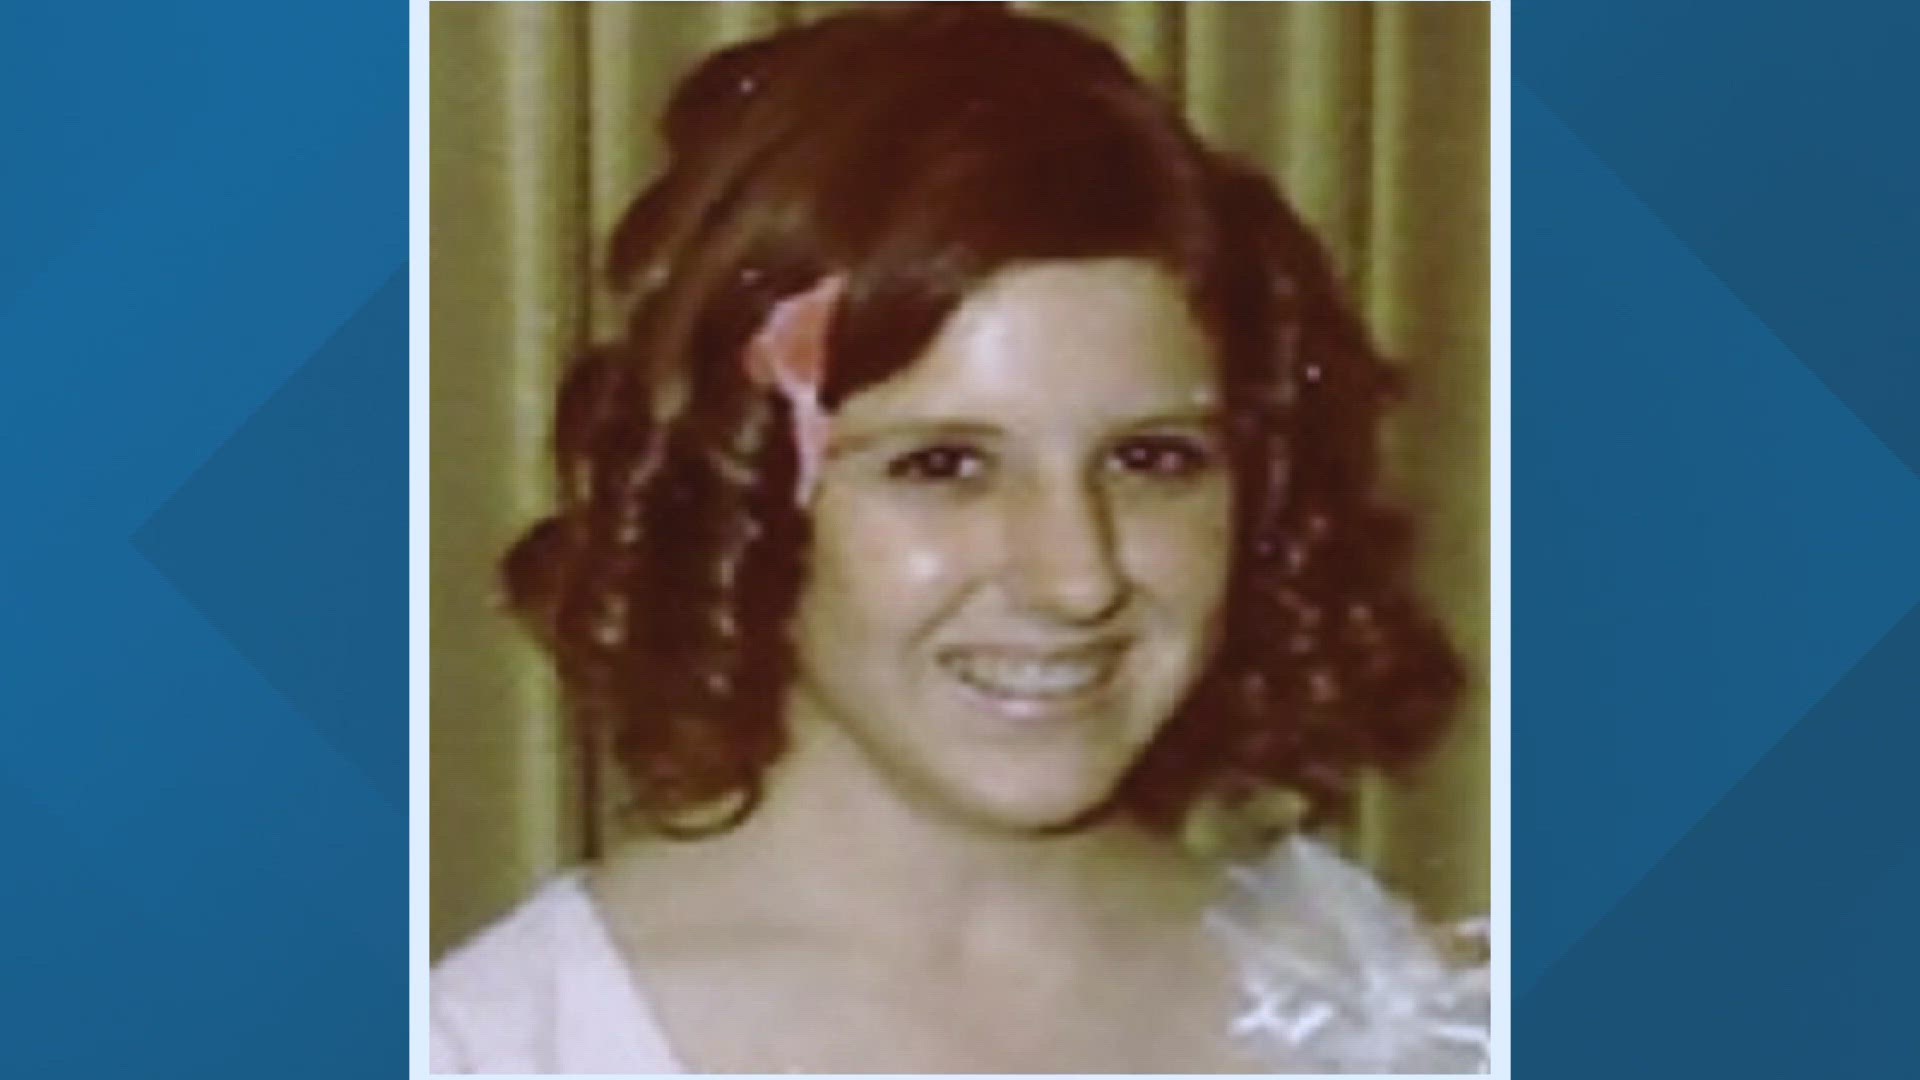 16-year-old Pamela Lynn Conyers was reported missing after going to the Harundale Mall in October 1970.